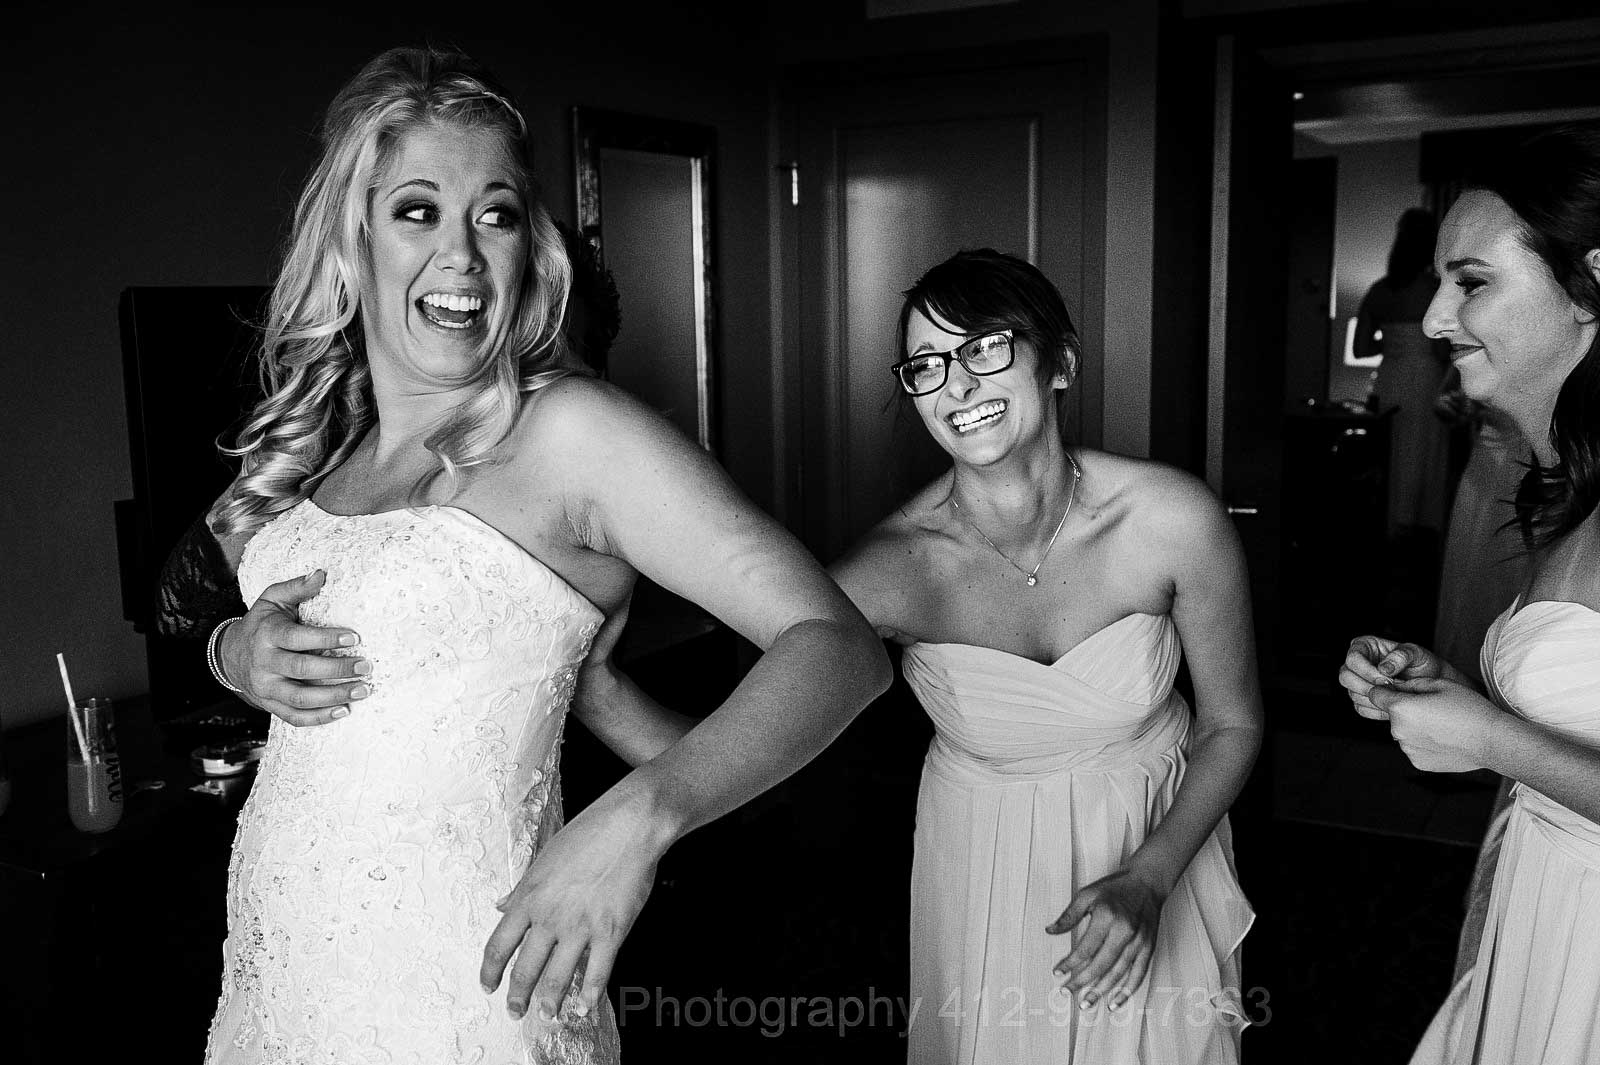 A bride looks back at her bridesmaids and laughs as she gets her wedding dress on.